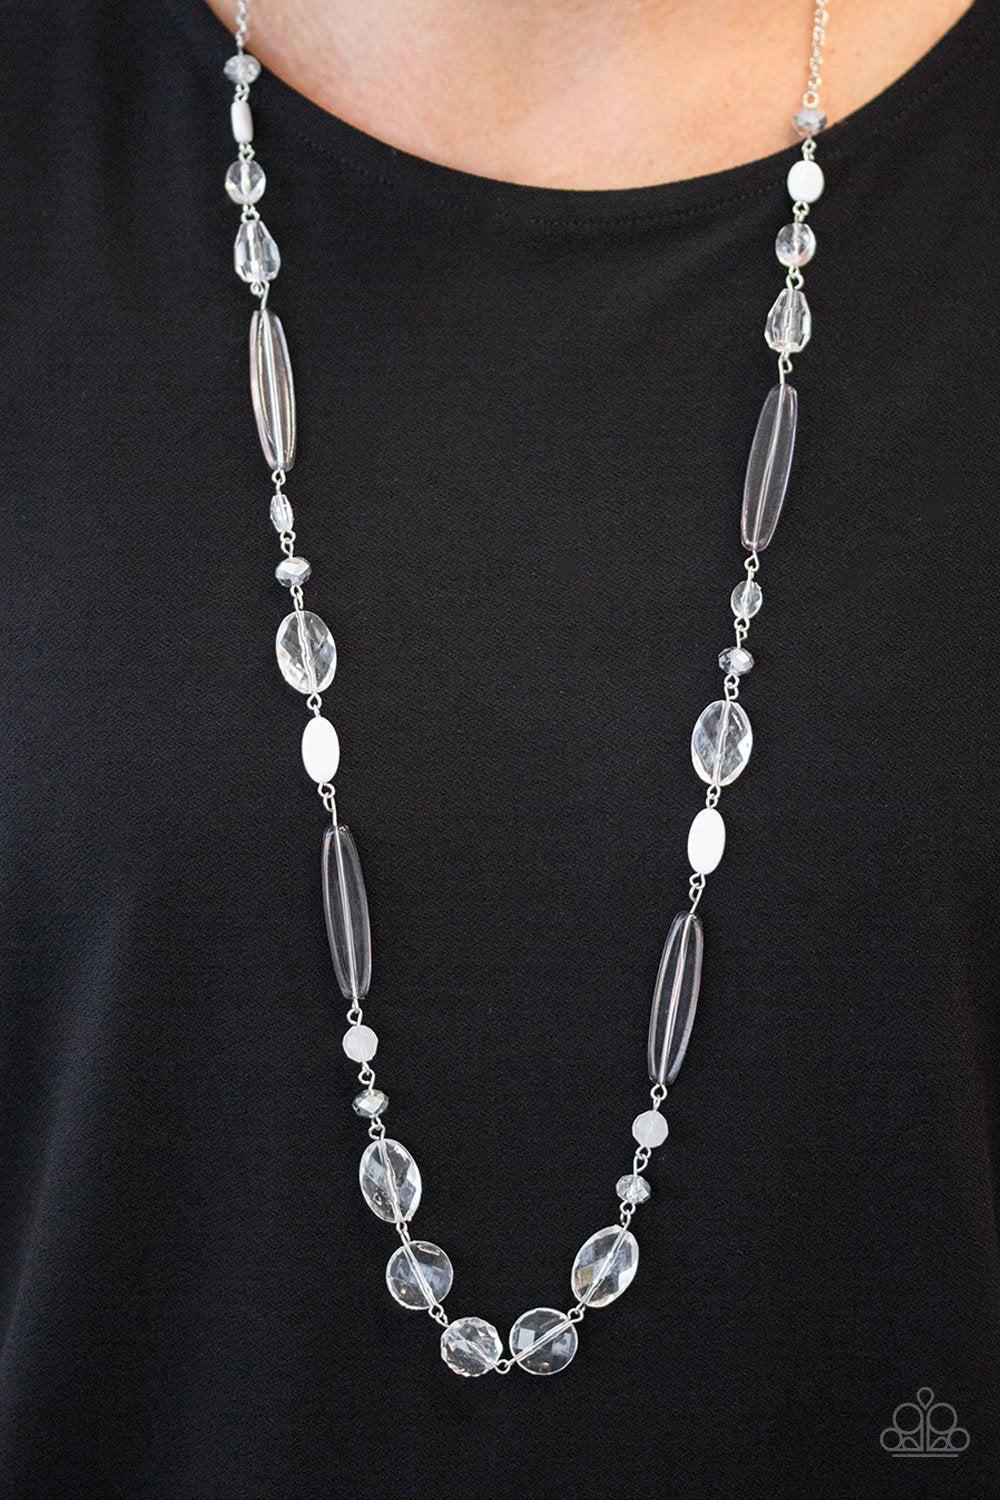 Quite Quintessence White Necklace - Paparazzi Accessories - model -CarasShop.com - $5 Jewelry by Cara Jewels